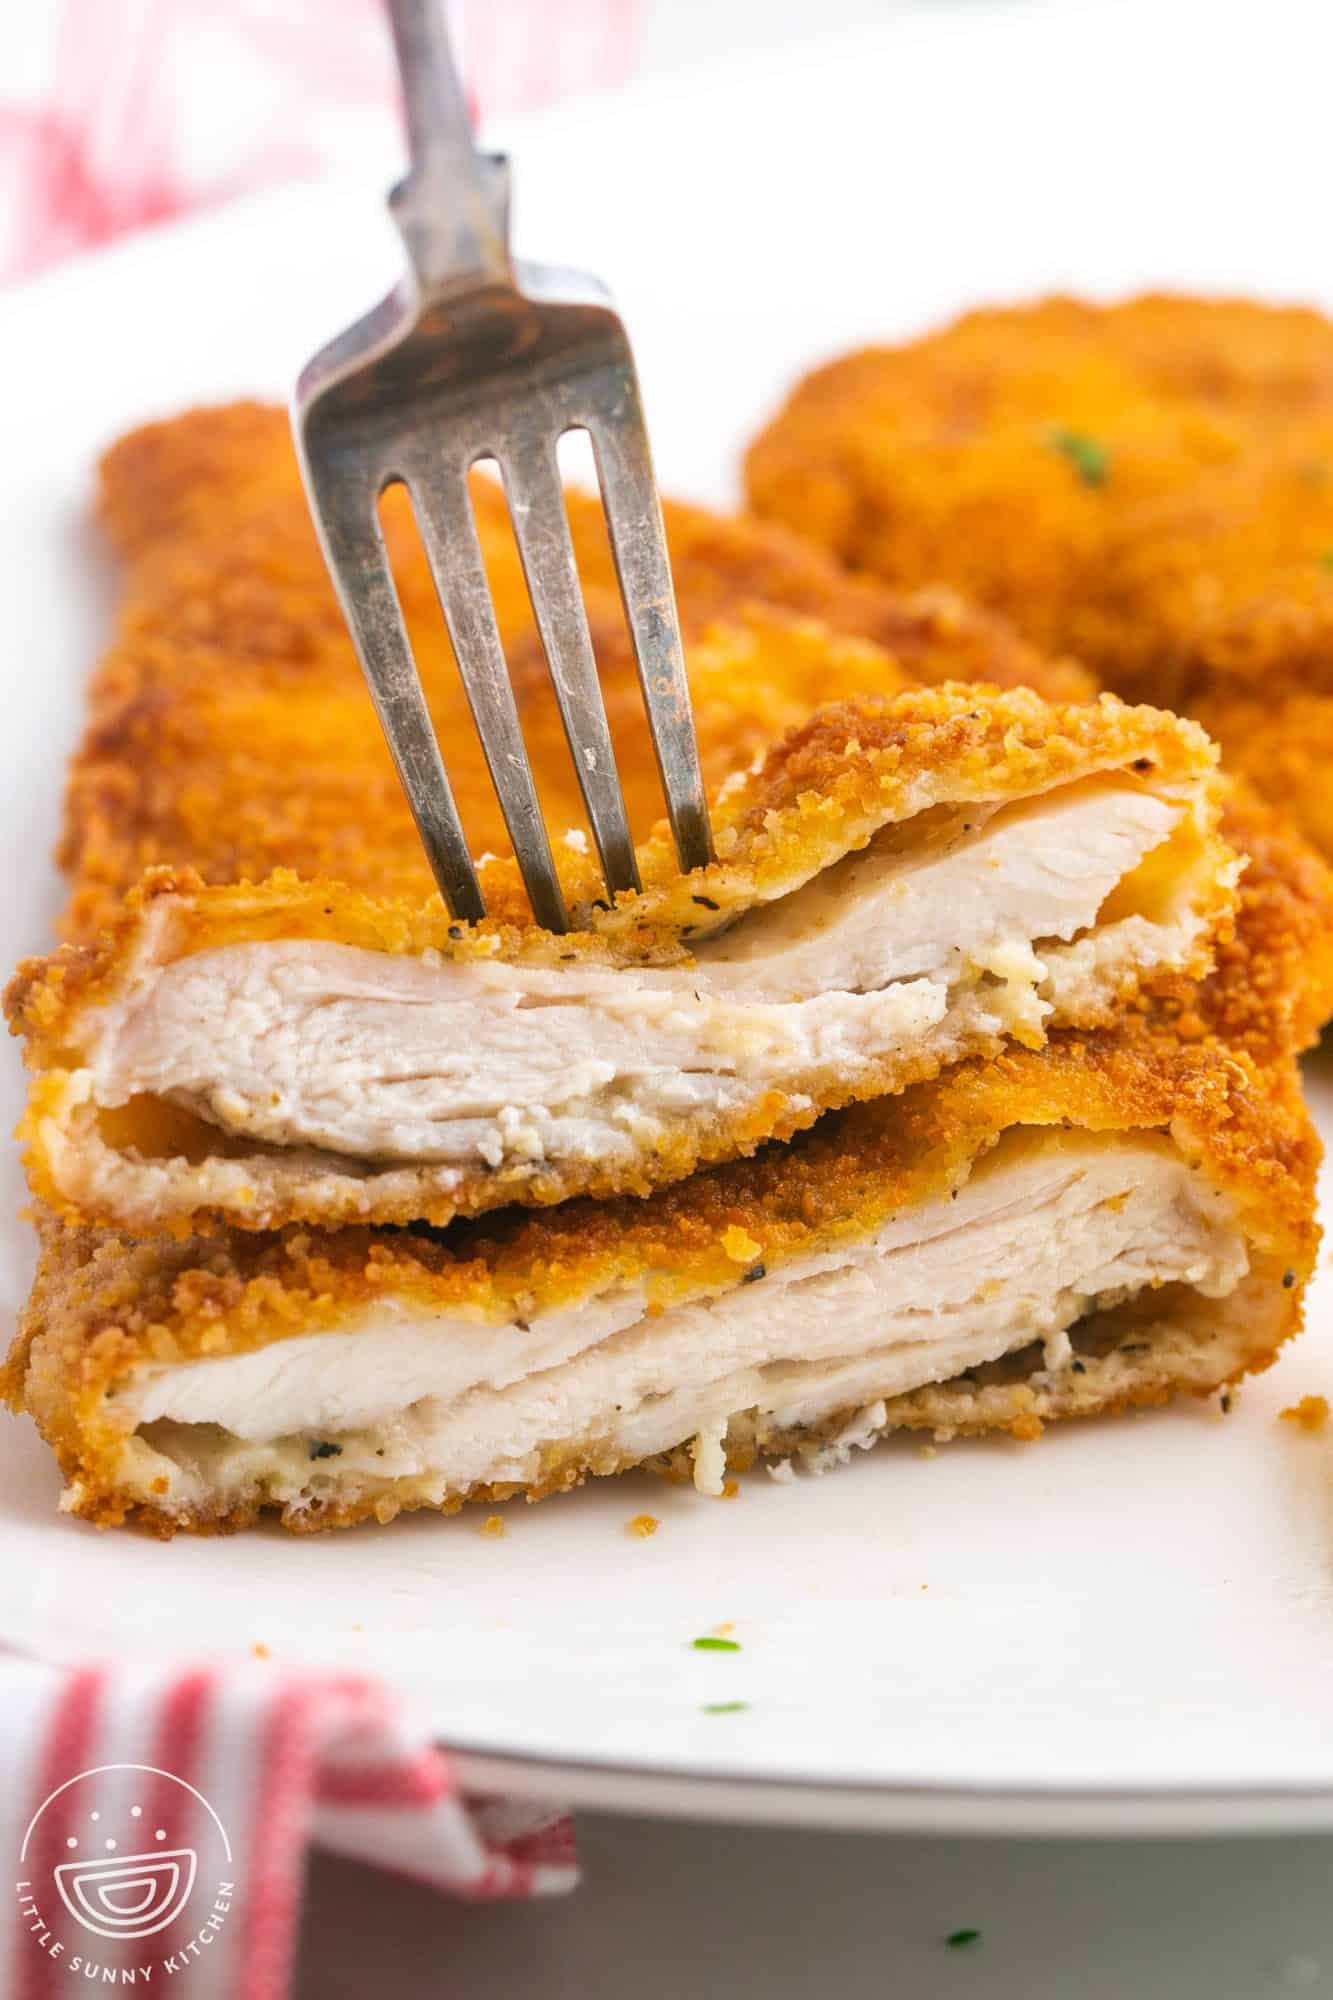 Sliced chicken schnitzel with fluffy pockets, and a fork